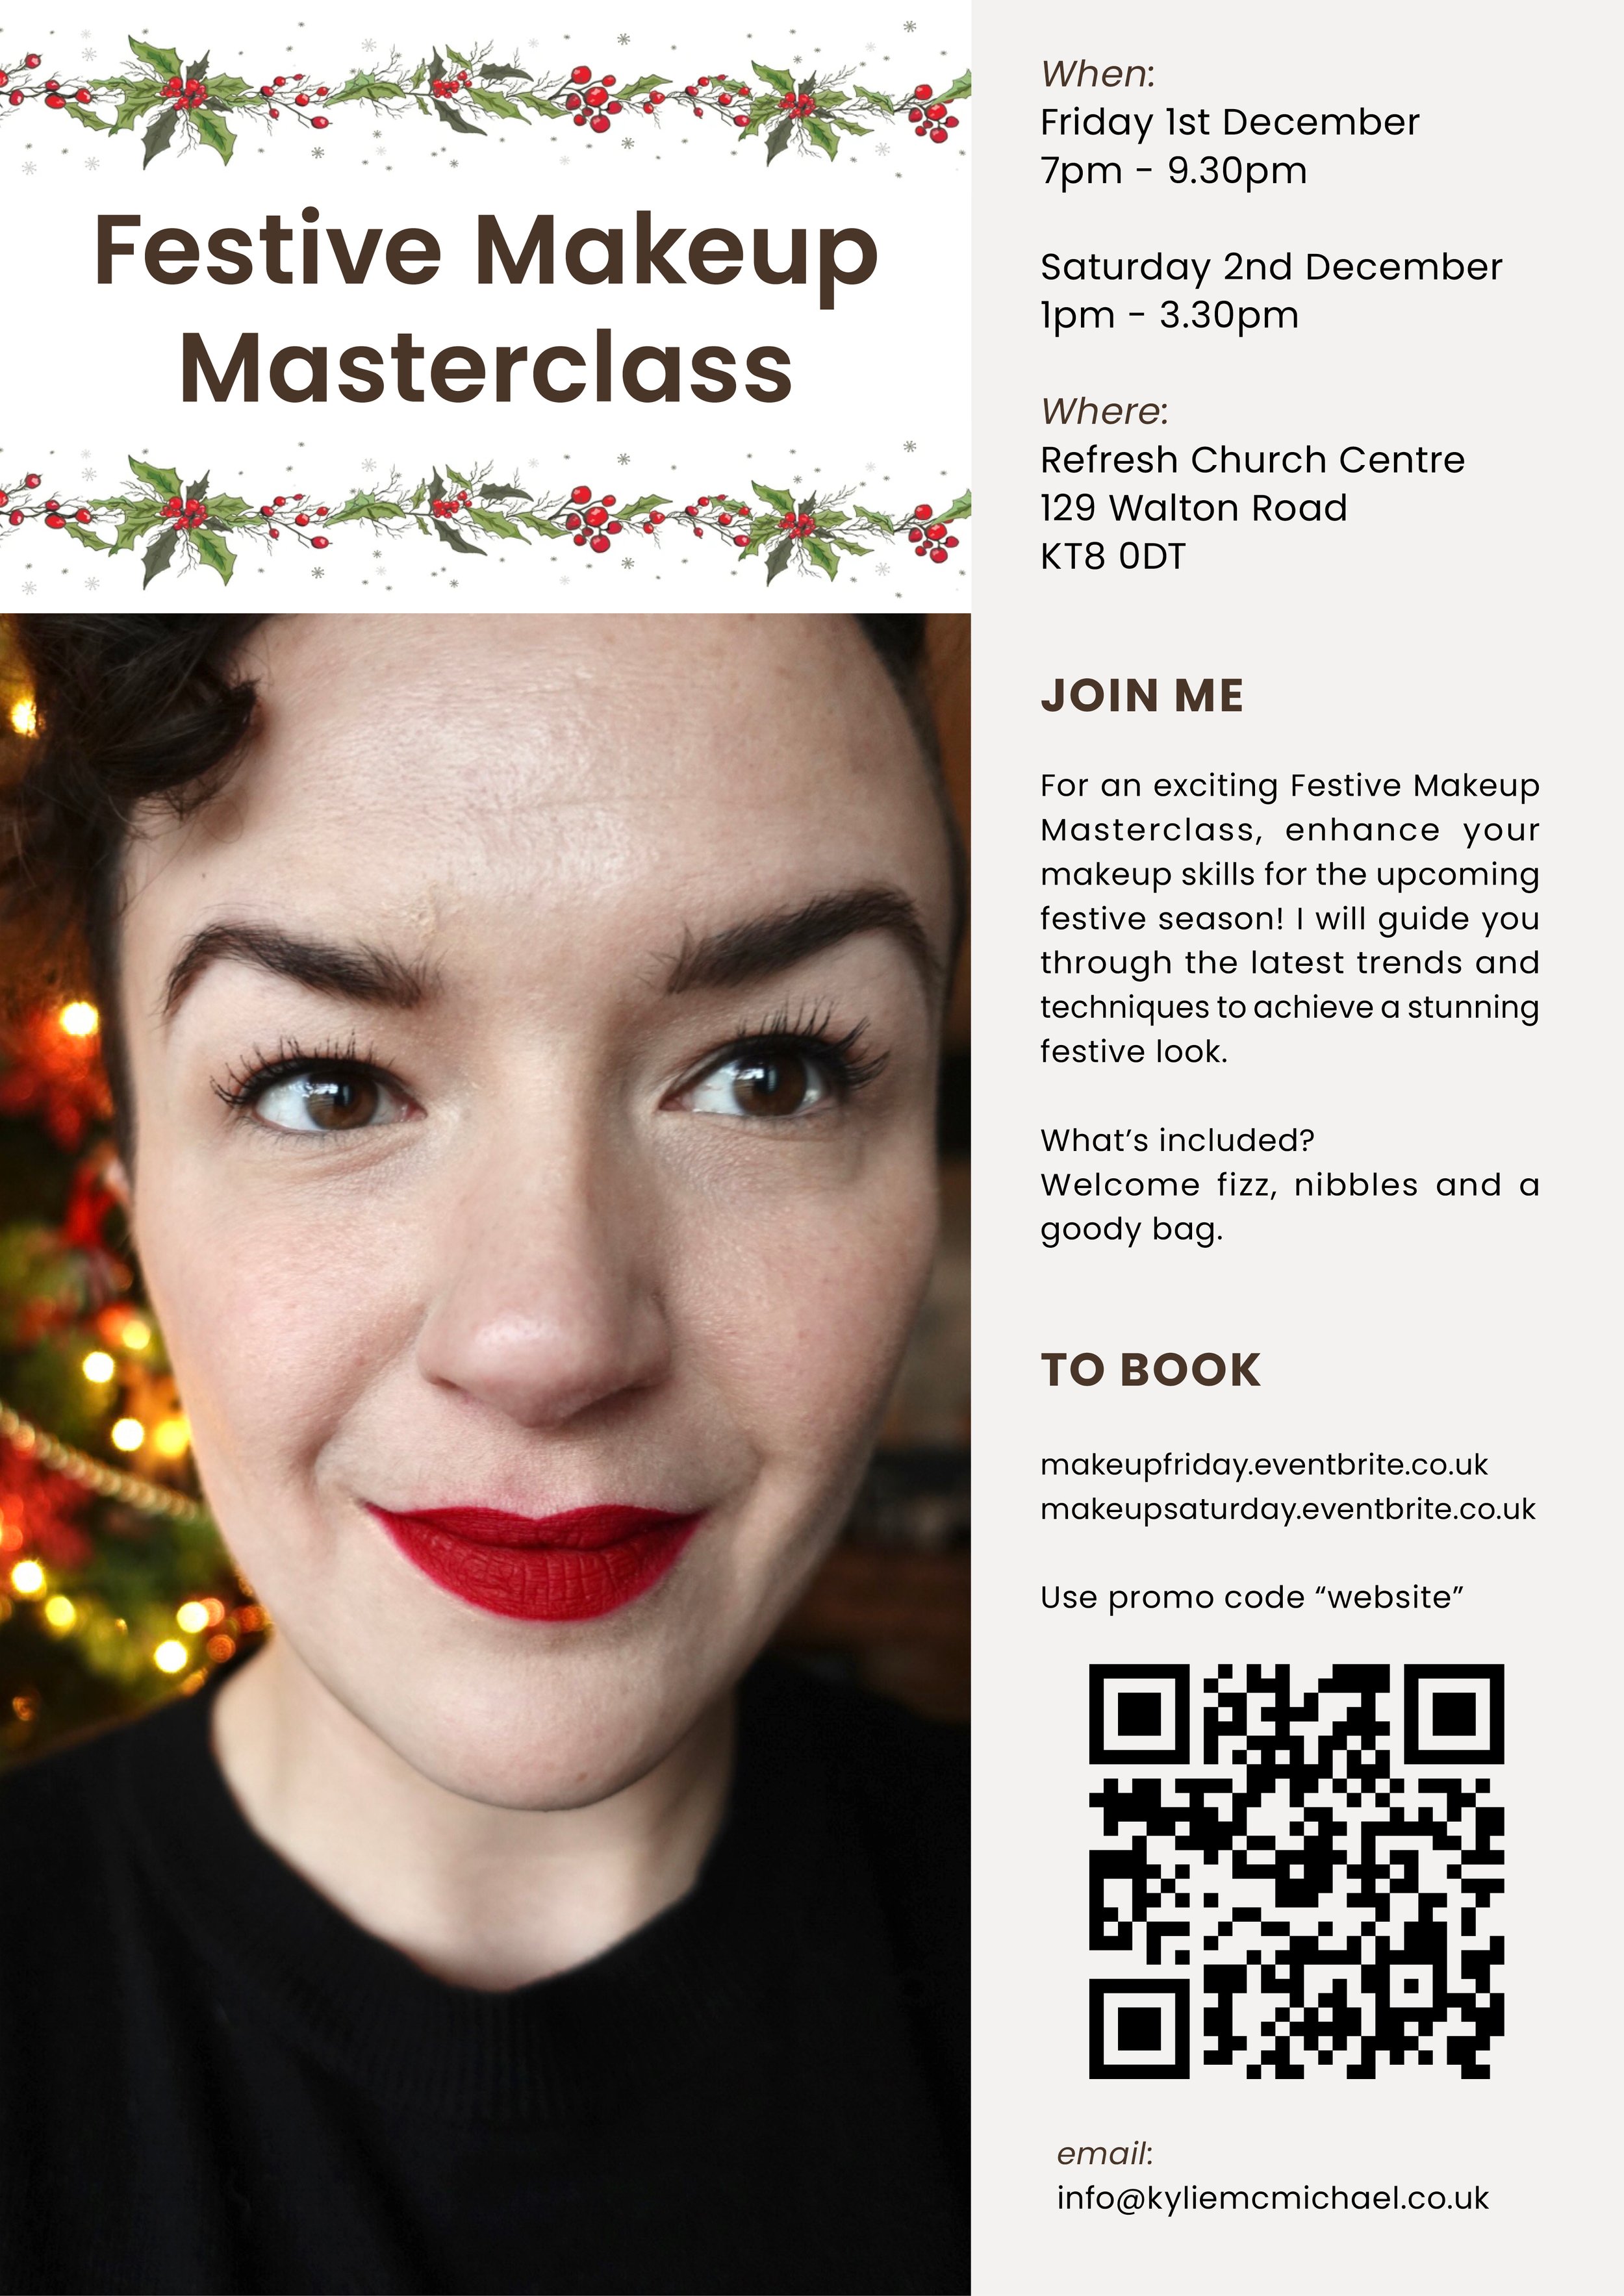 Festive Makeup Masterclass In Molesey